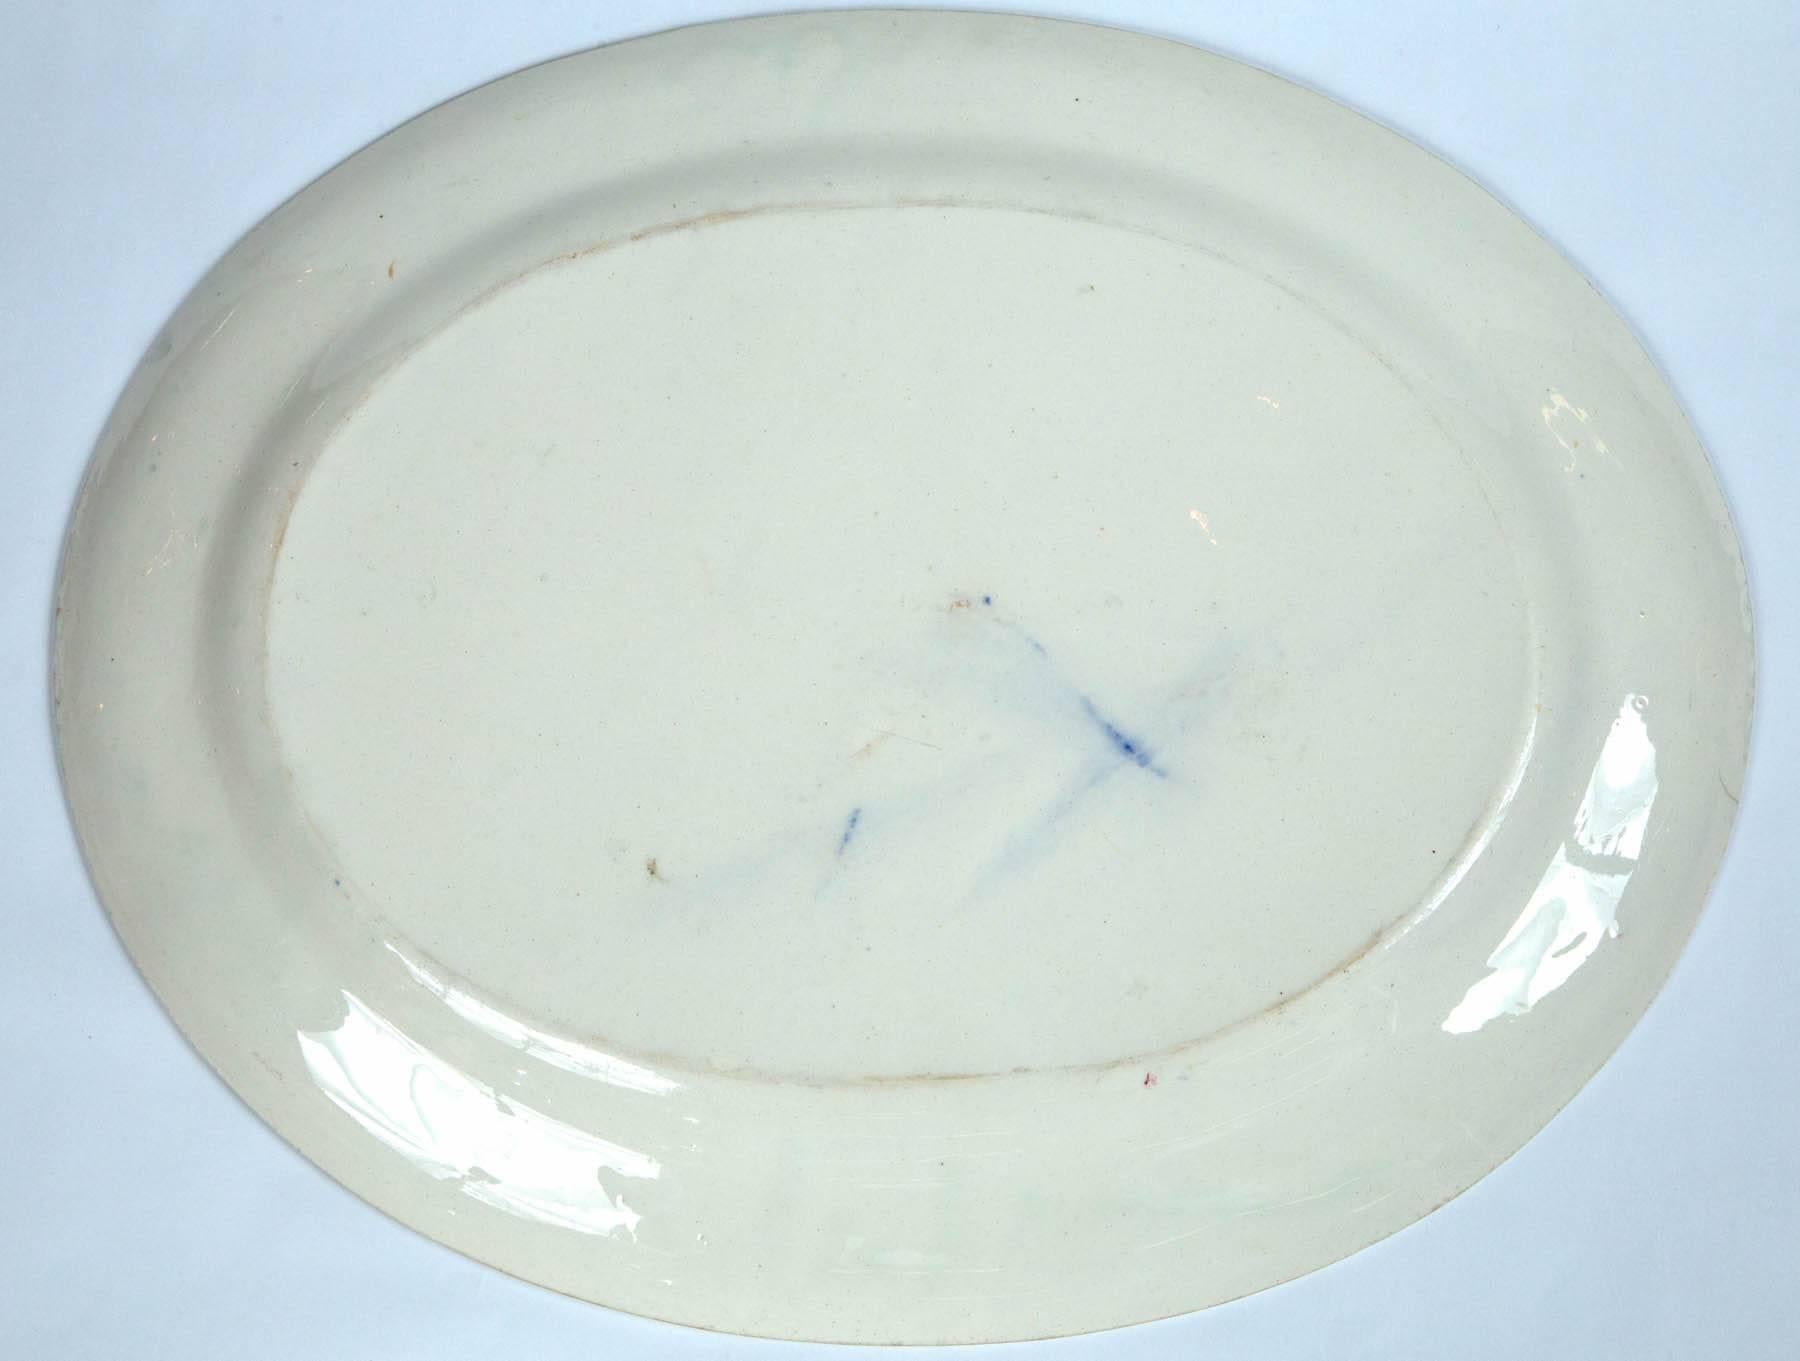 Late 19th Century Antique Ceramic Serving Platter, Early 19th Century